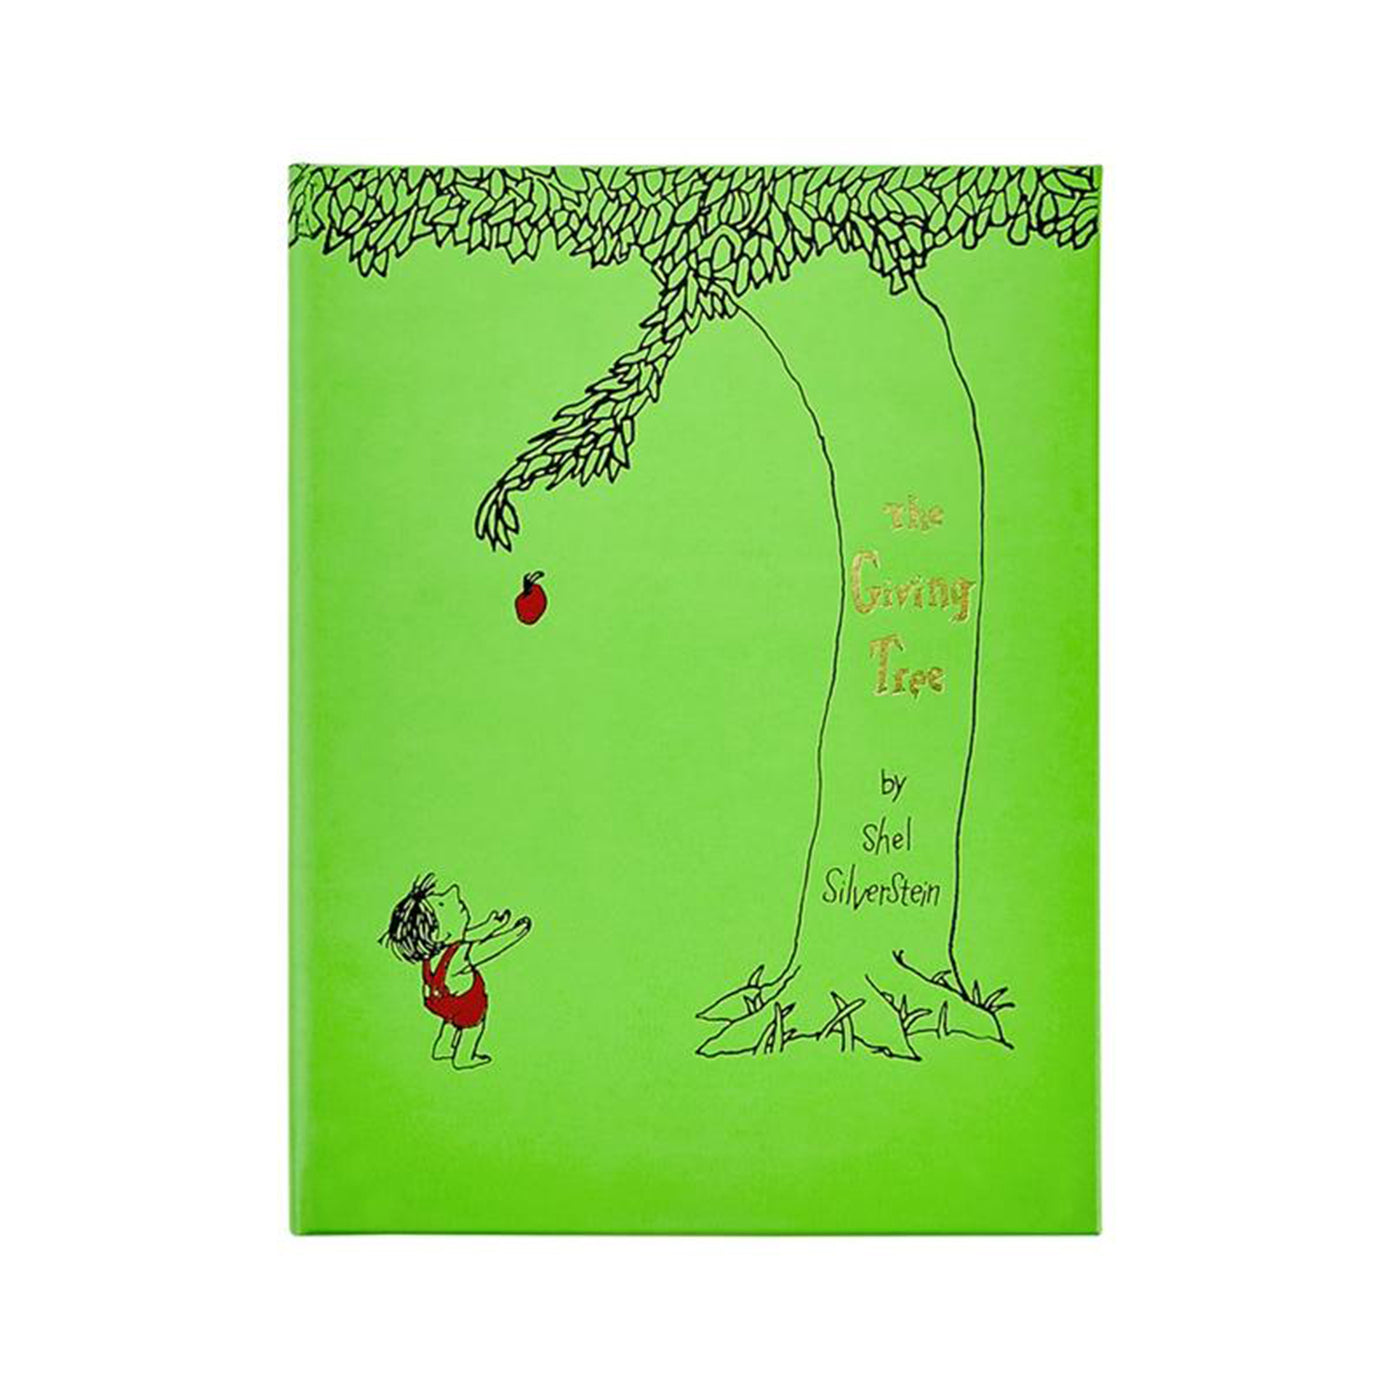 The Giving Tree - Leather-bound Edition